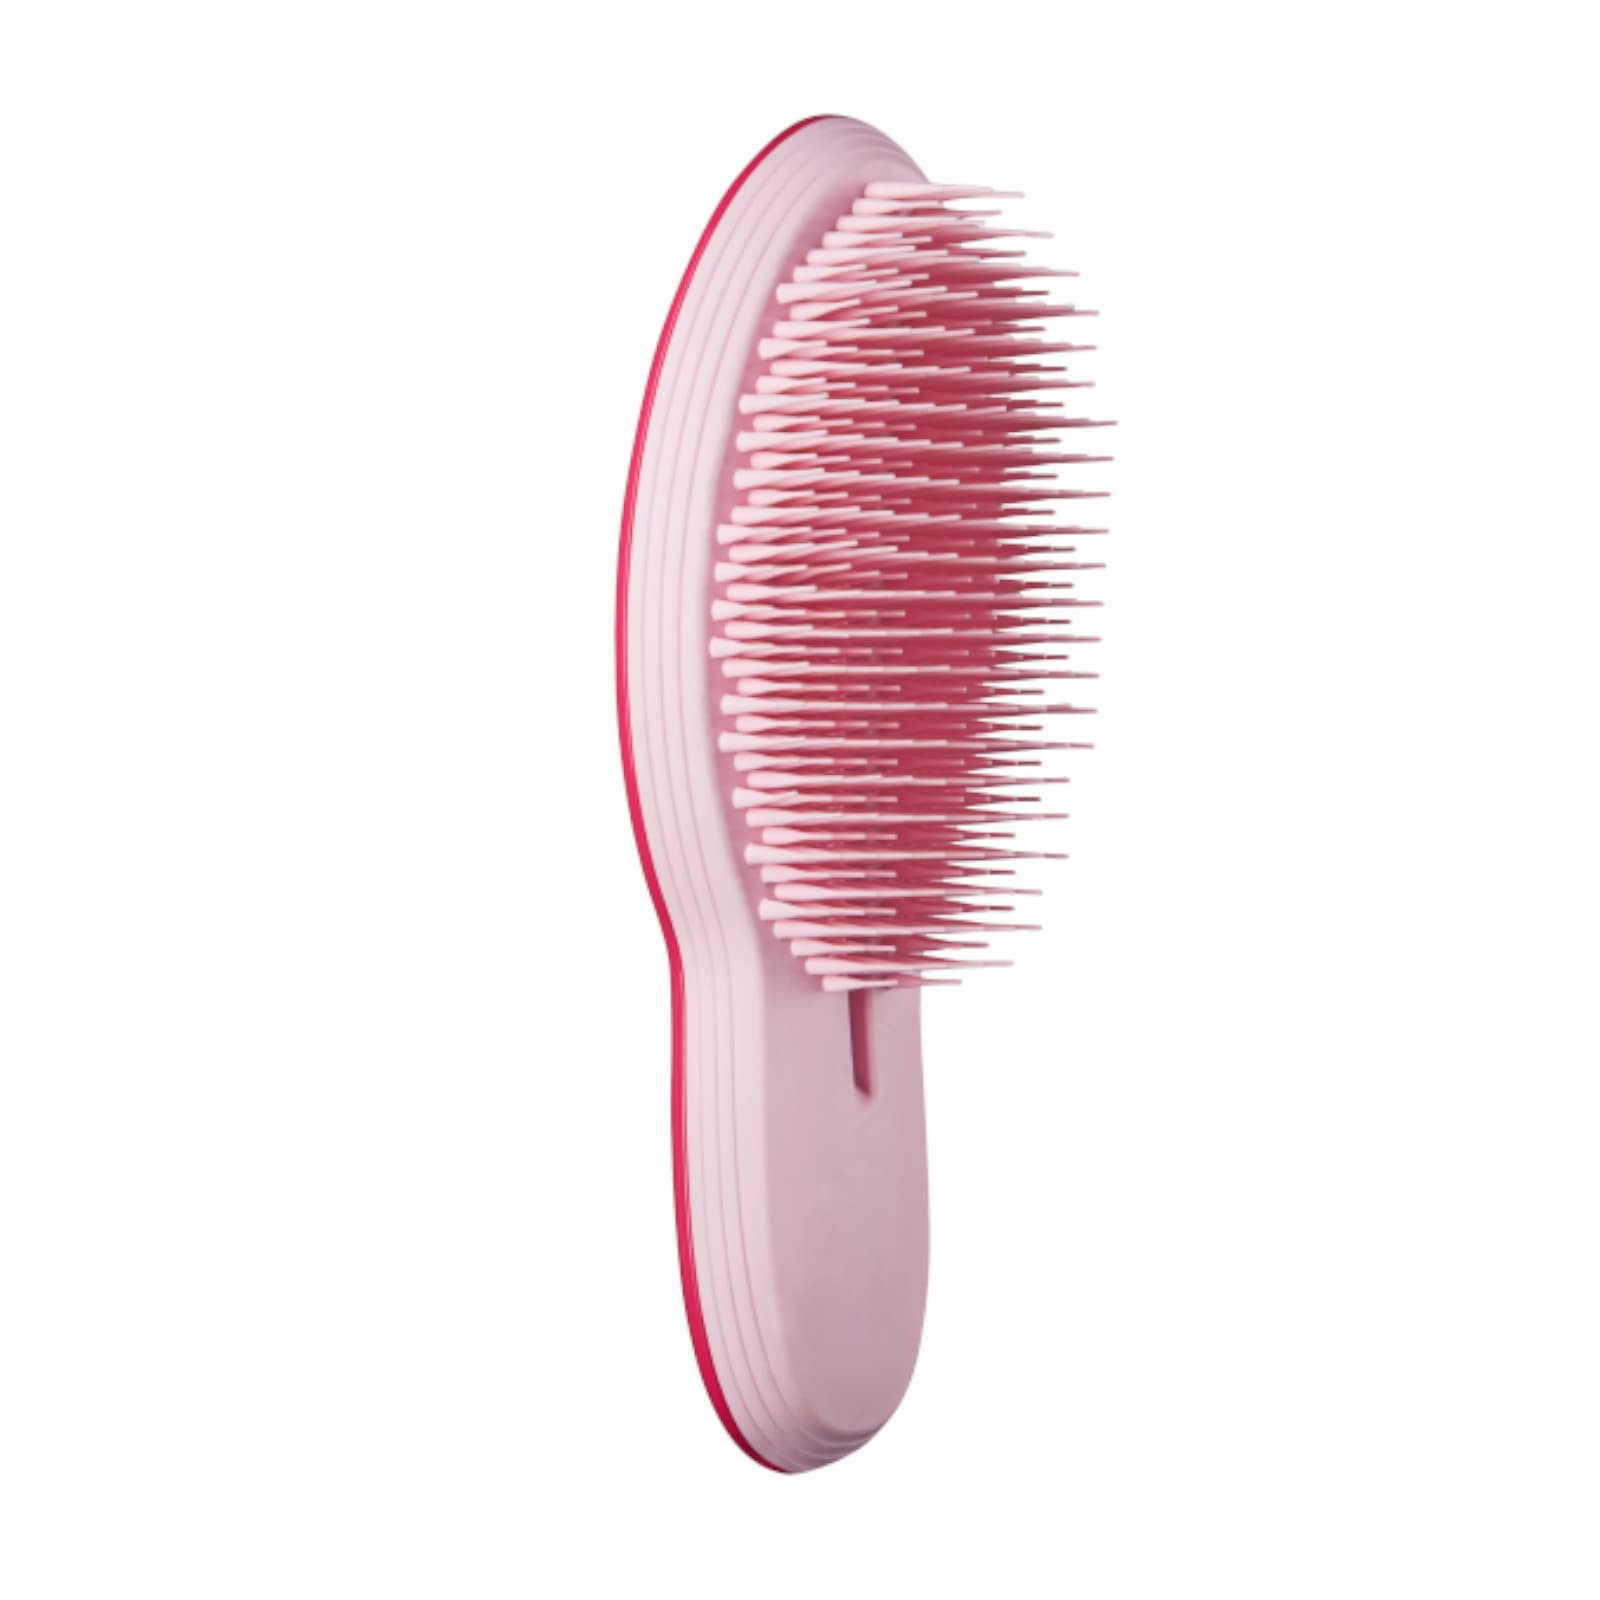 TANGLE TEEZER Styling Brush - Ultimate Finisher | North Laine Hair Co